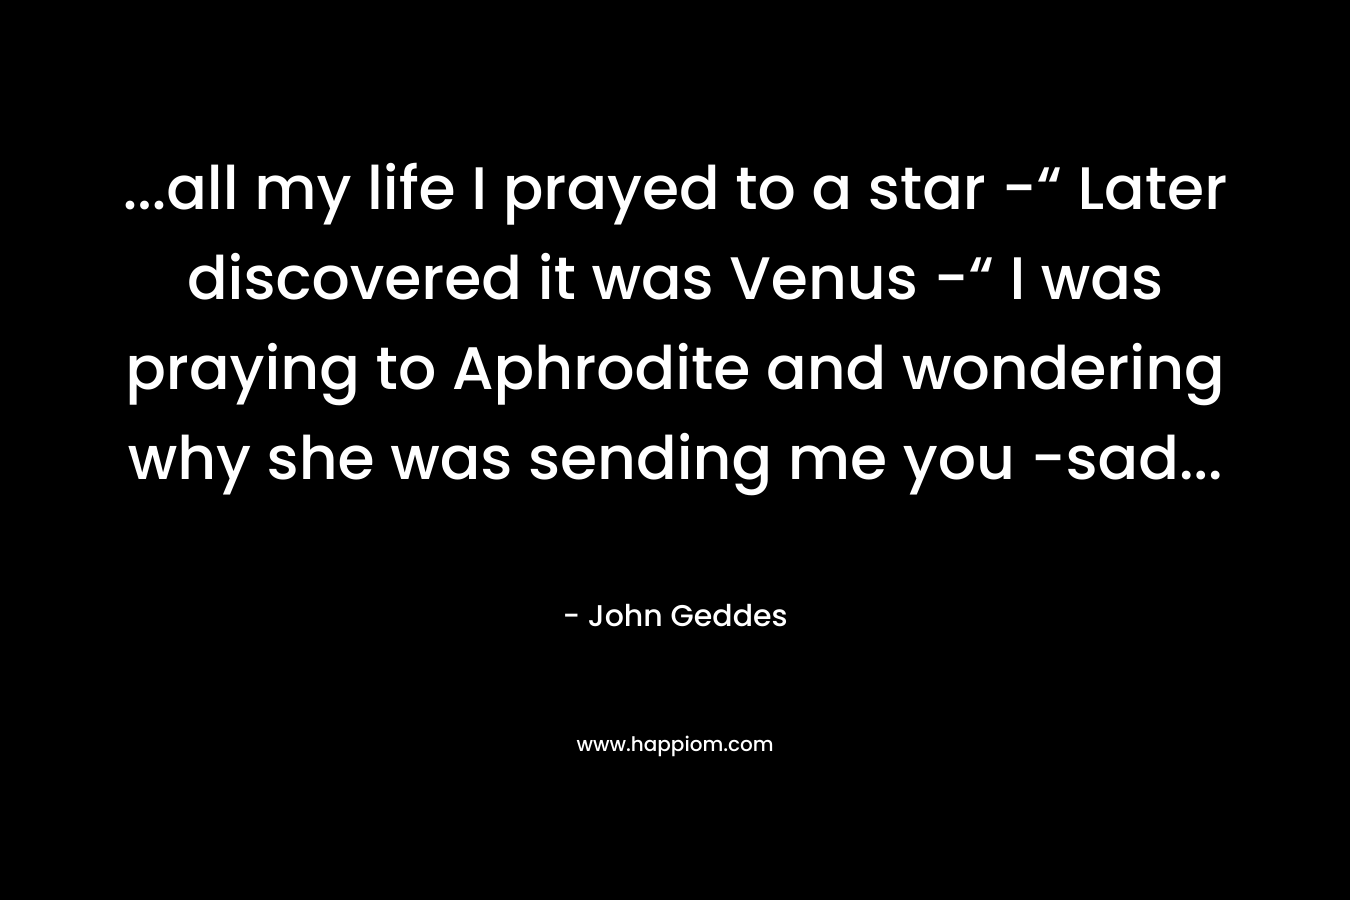 ...all my life I prayed to a star -“ Later discovered it was Venus -“ I was praying to Aphrodite and wondering why she was sending me you -sad...